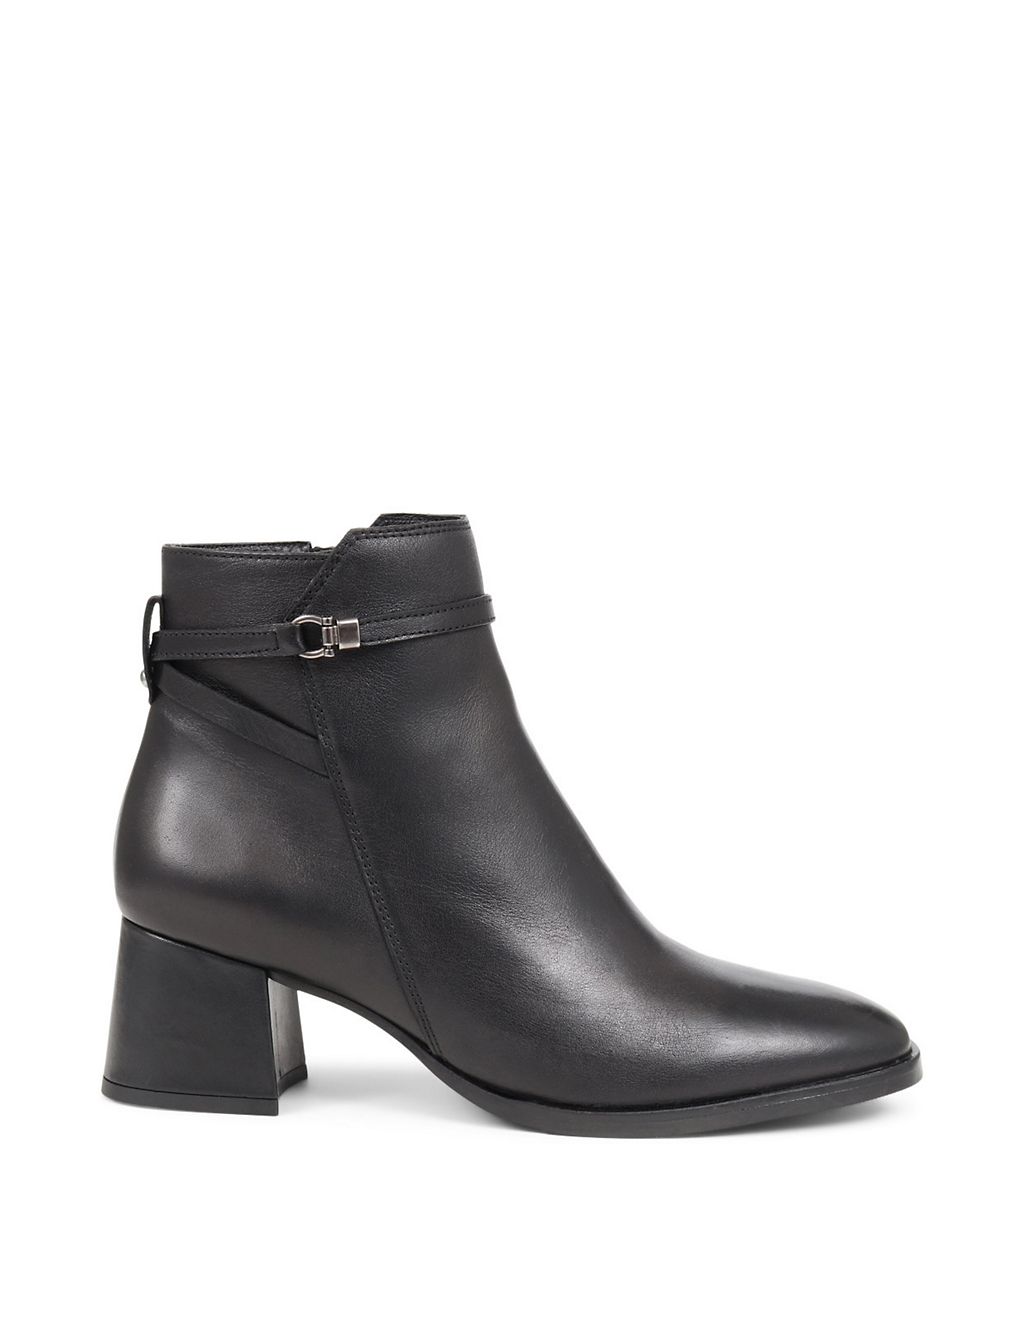 Leather Block Heel Ankle Boots 1 of 7